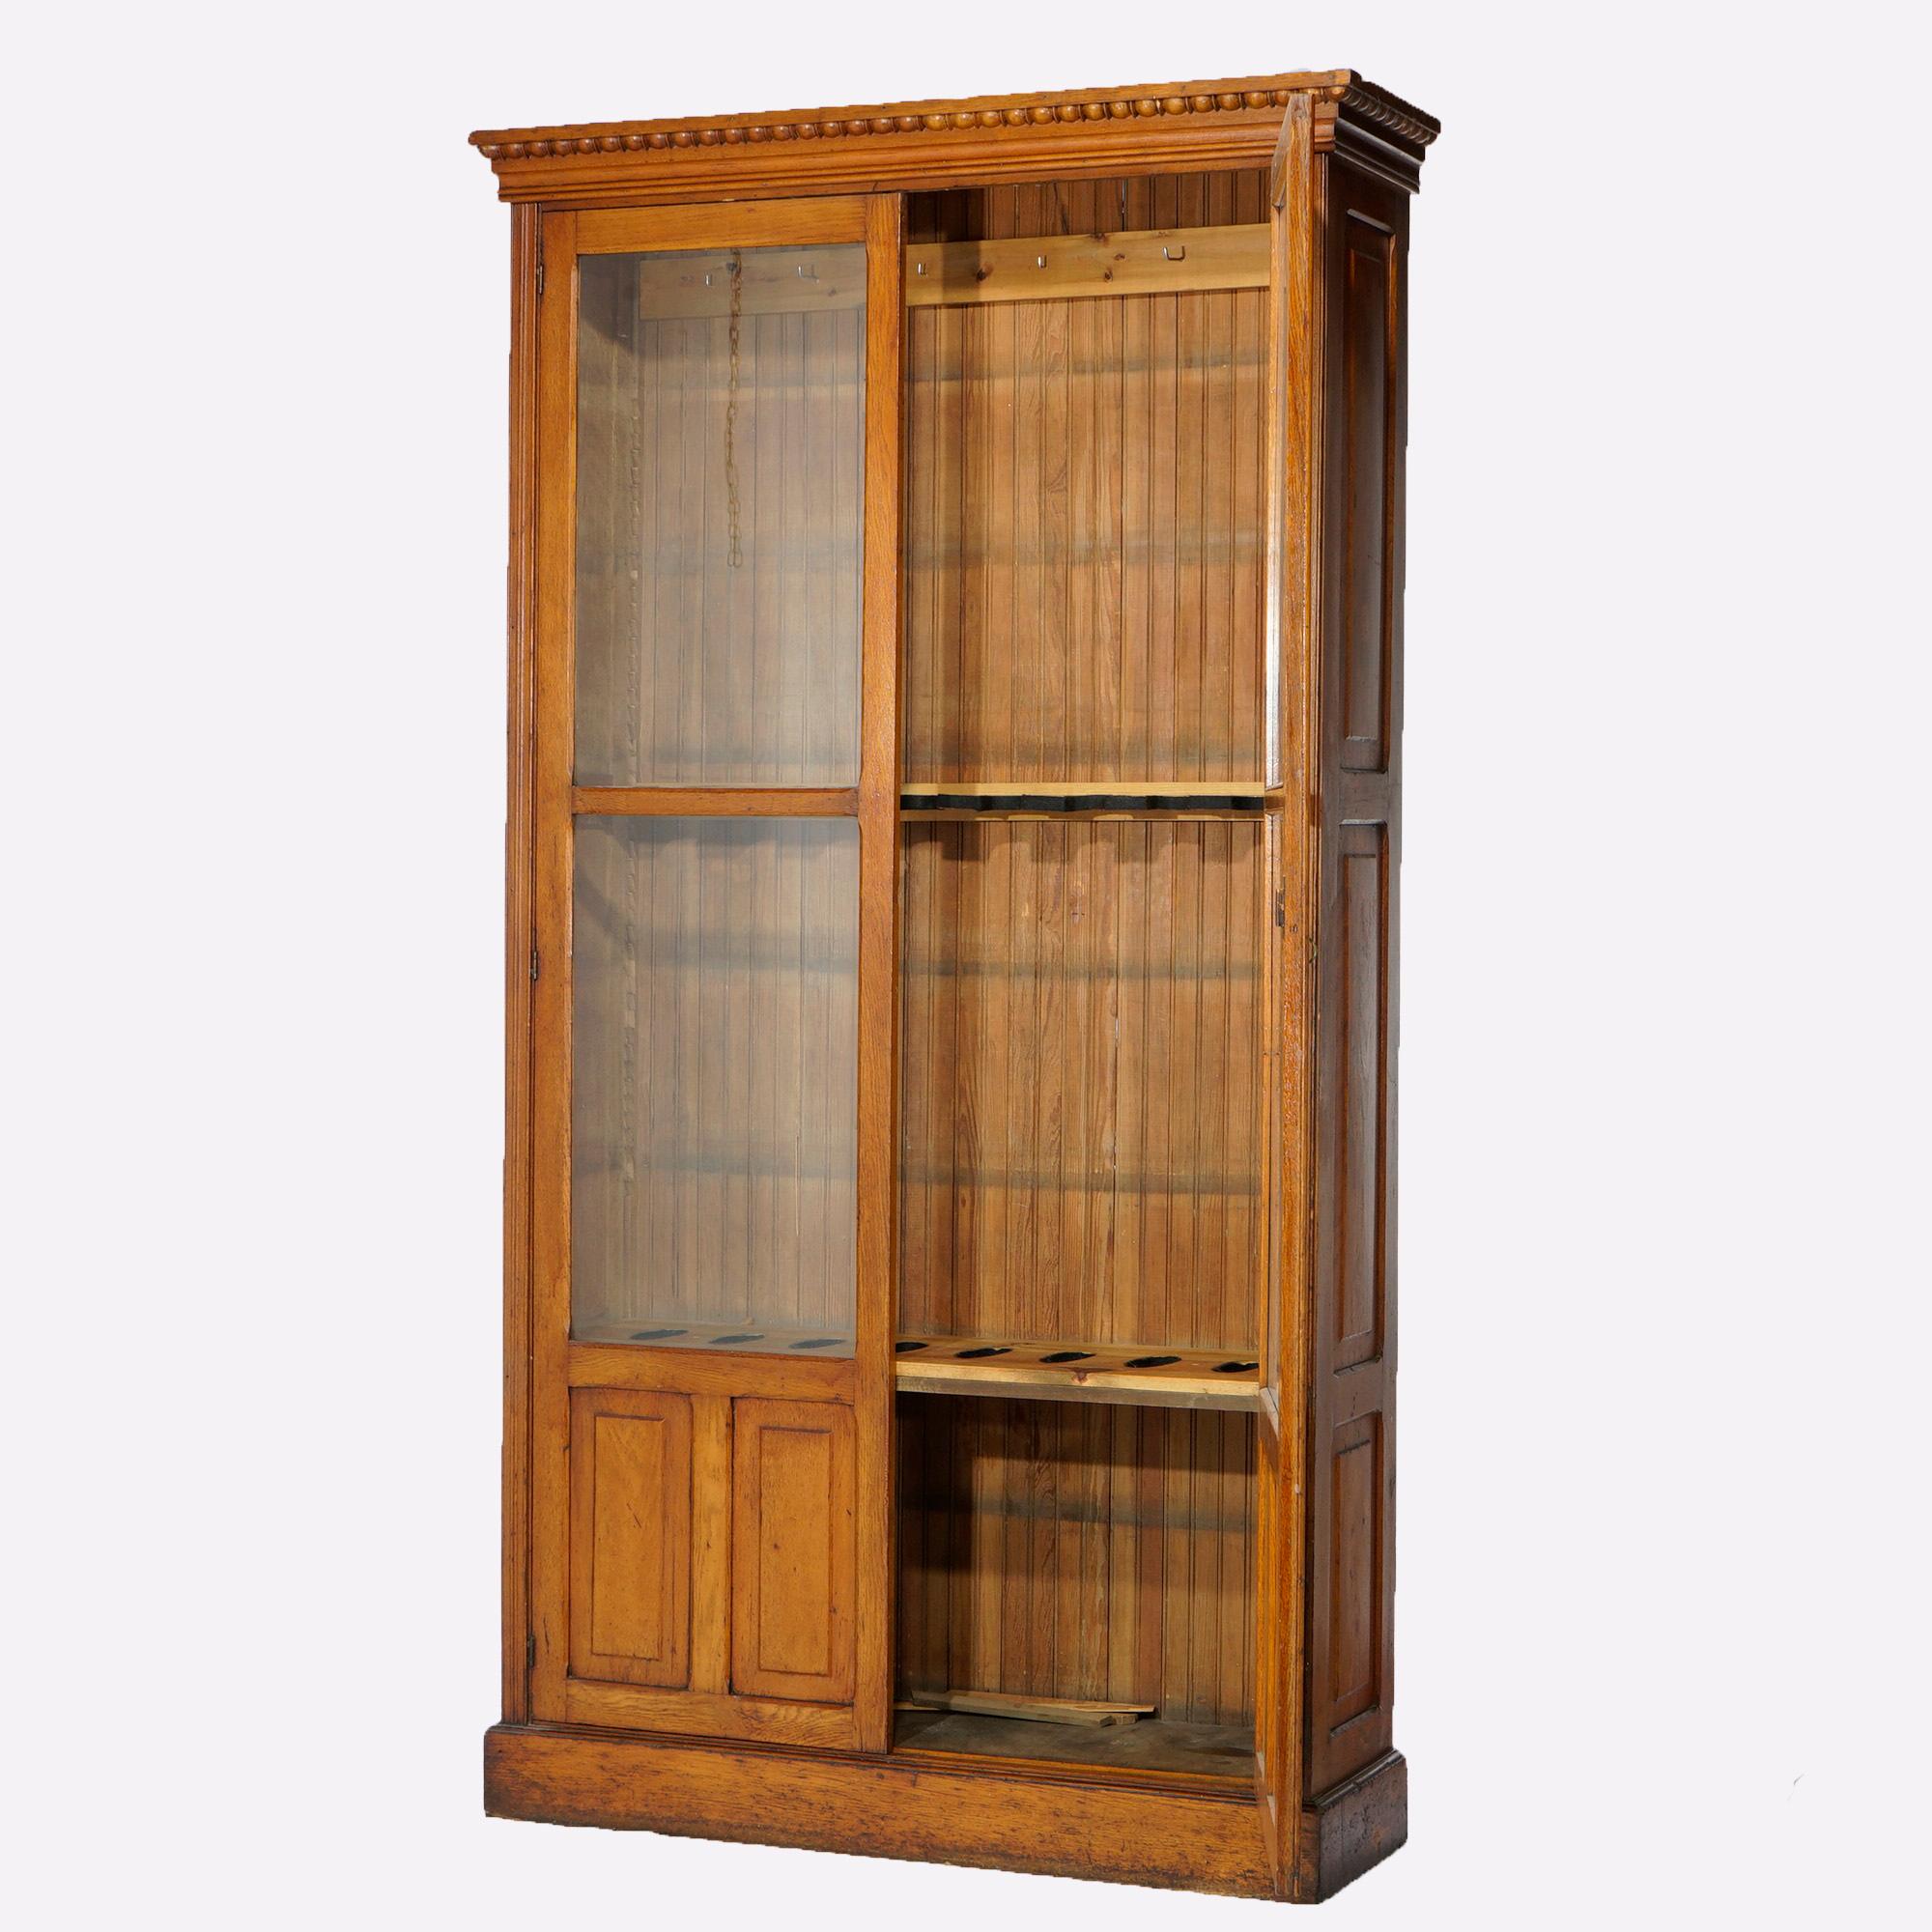 An antique gun cabinet in the manner of Horner offers paneled oak construction with double glass doors over blind door storage area, c1900

Measures- 94.25''H x 51.25''W x 16''D.